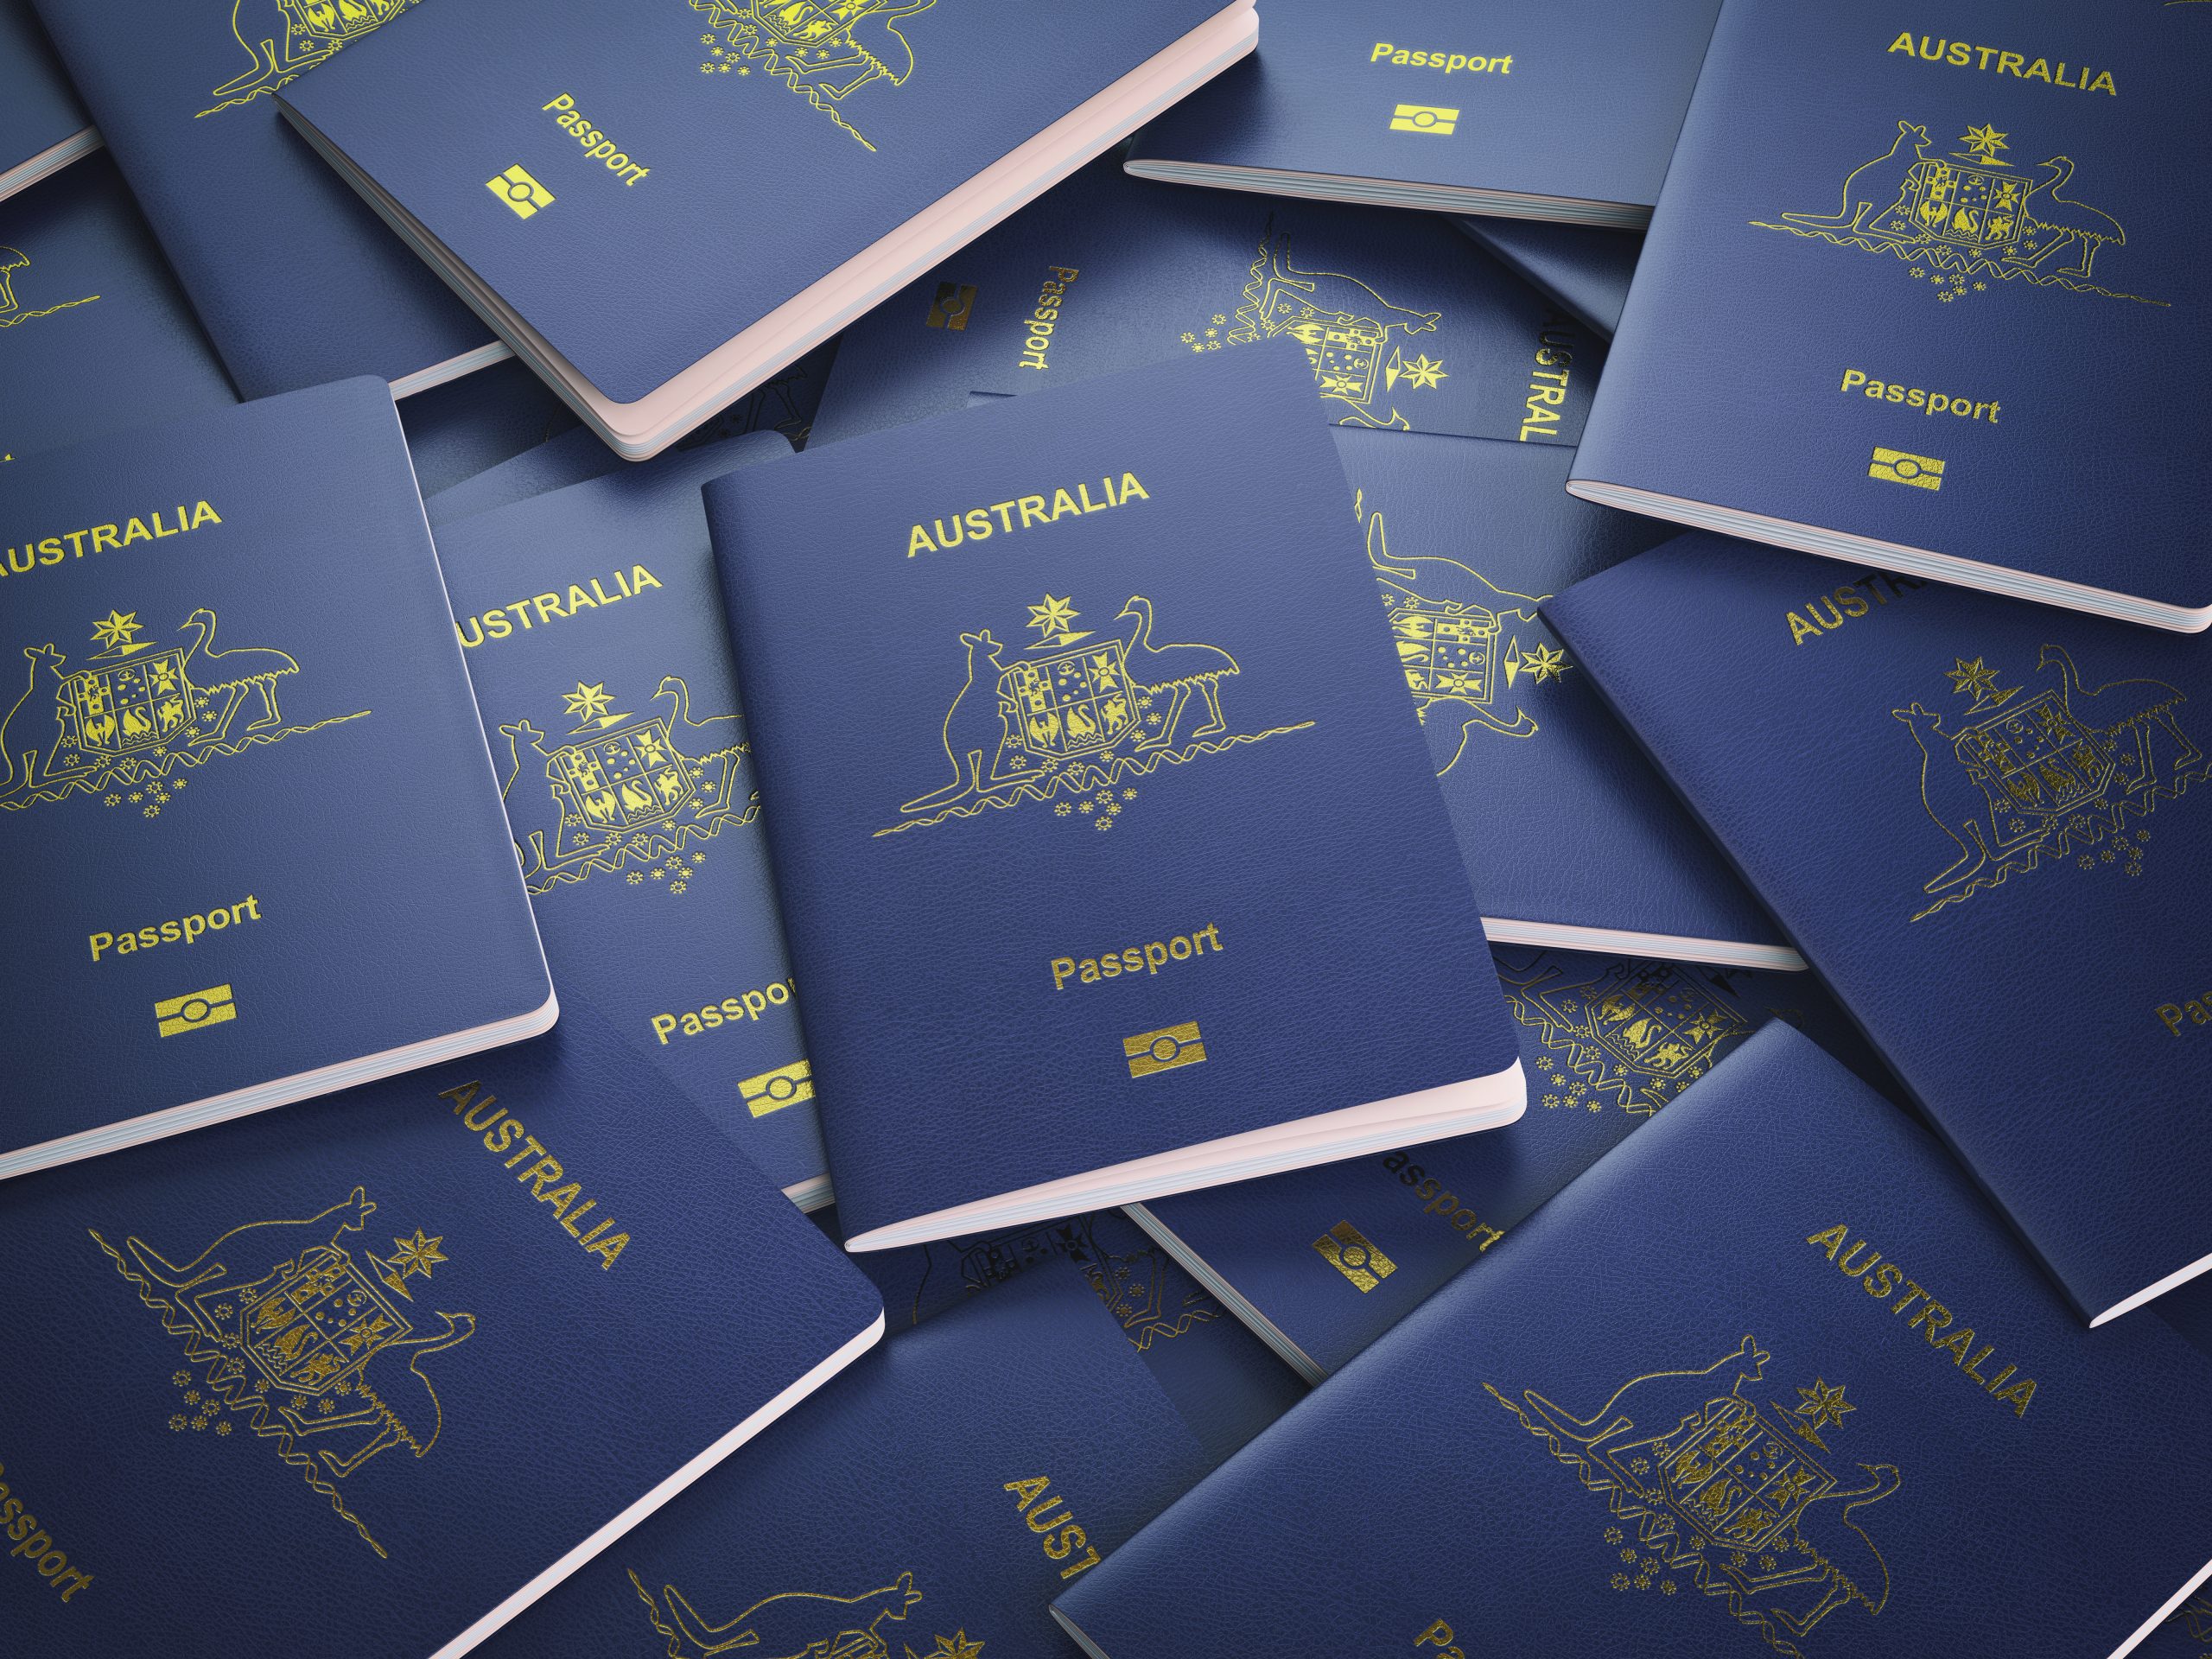 7 Mistakes to avoid when applying for the new 491 Regional Visa in